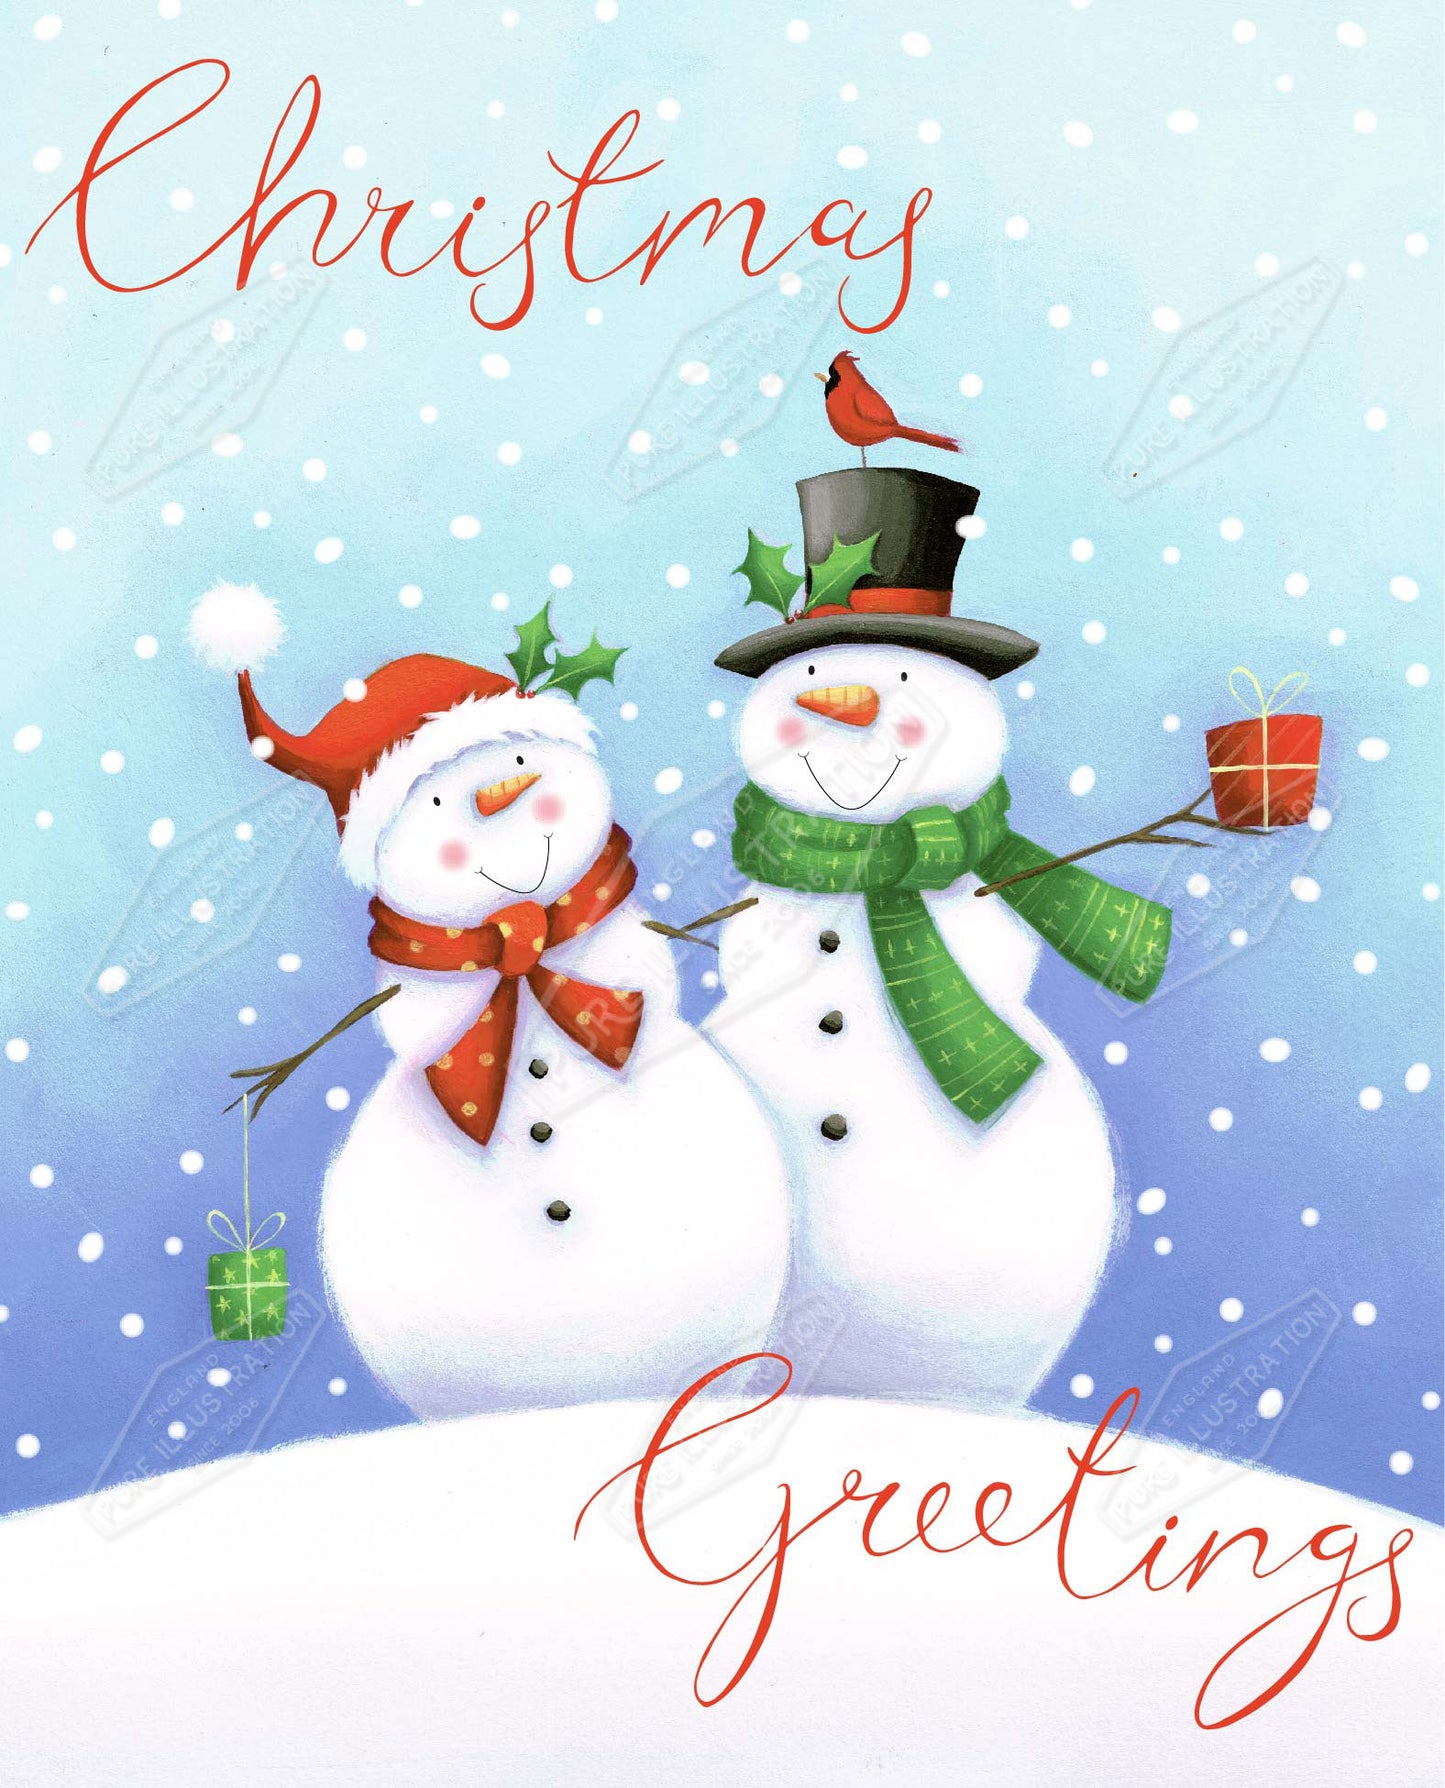 00035099SPI- Sarah Pitt is represented by Pure Art Licensing Agency - Christmas Greeting Card Design